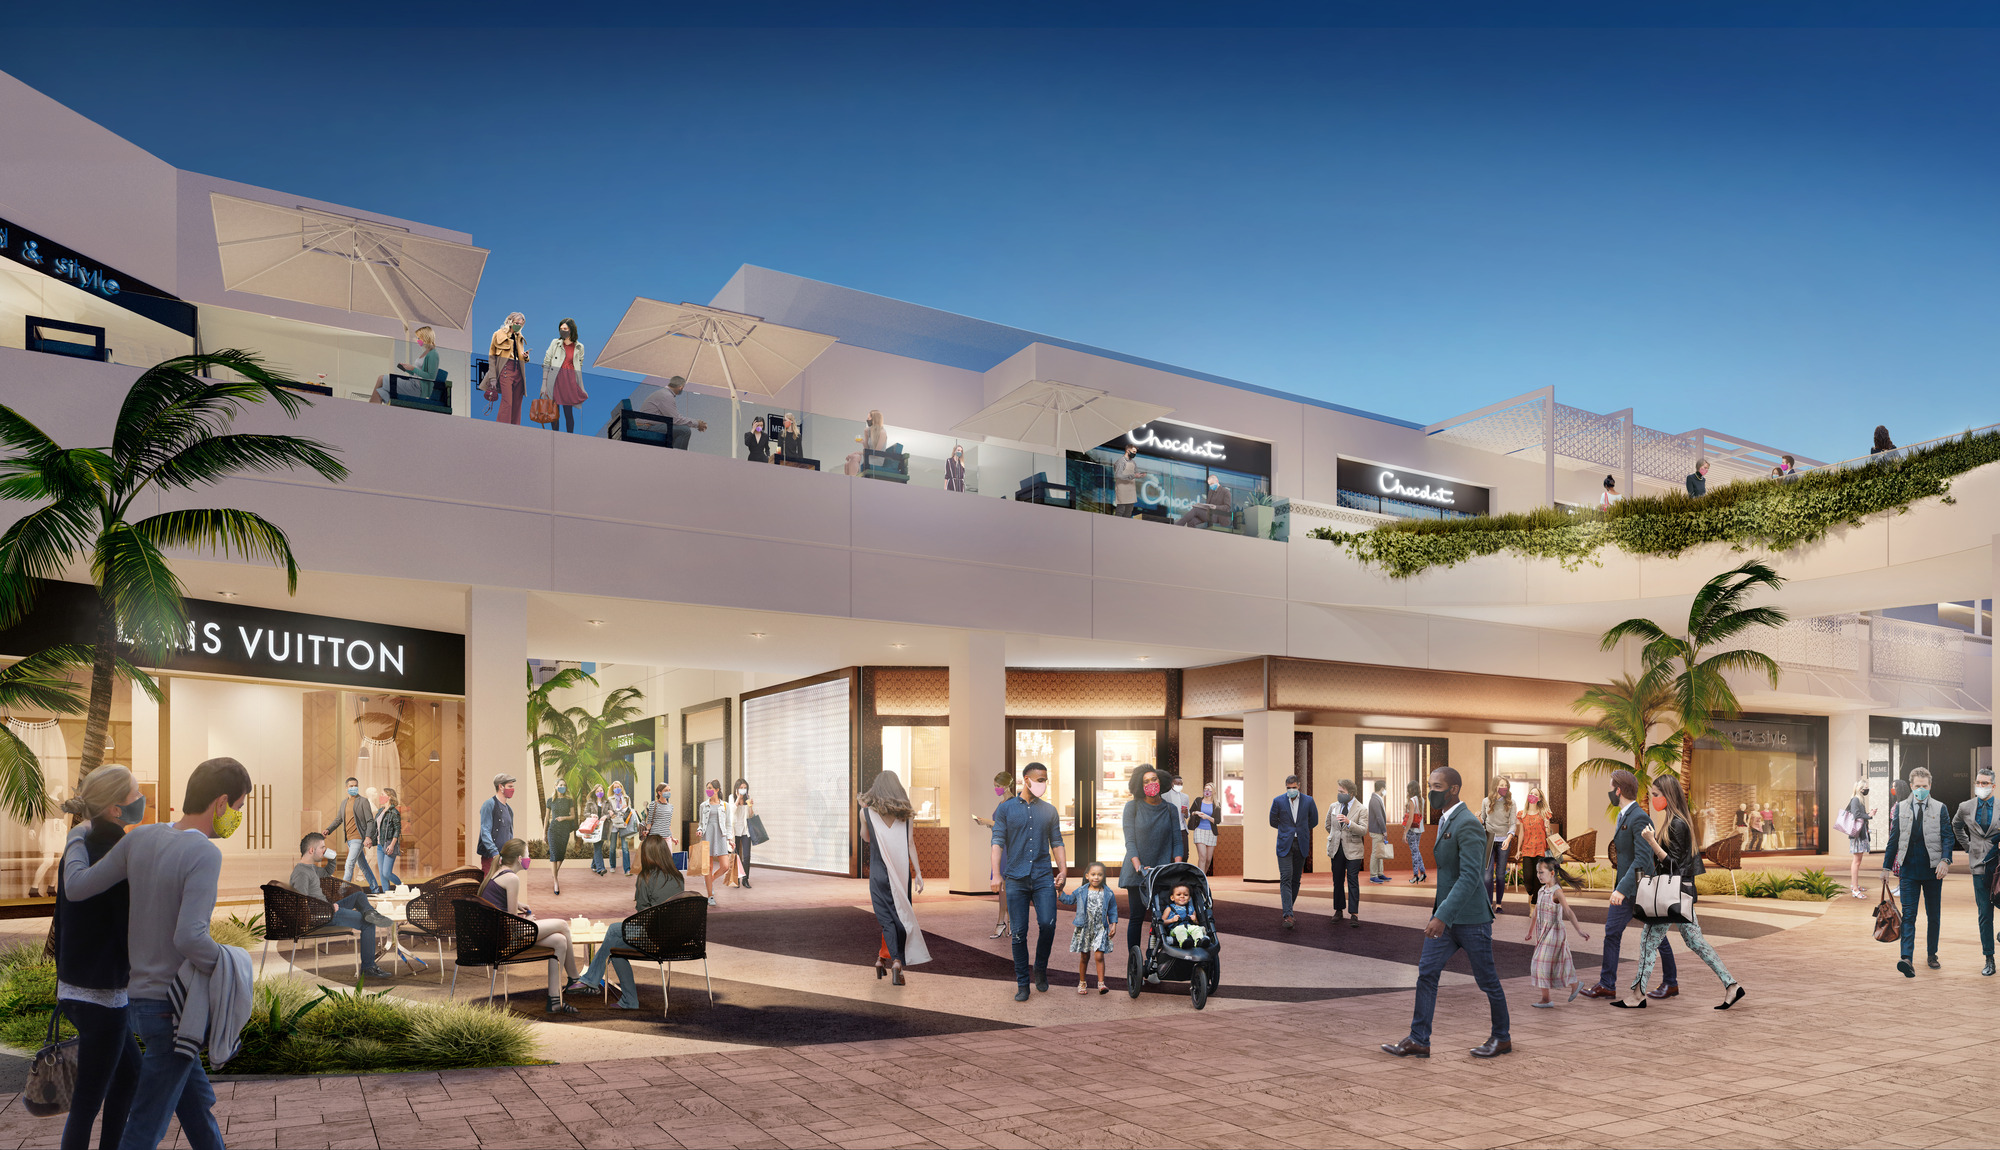 New retailers announced for Fashion Valley Mall as renovation